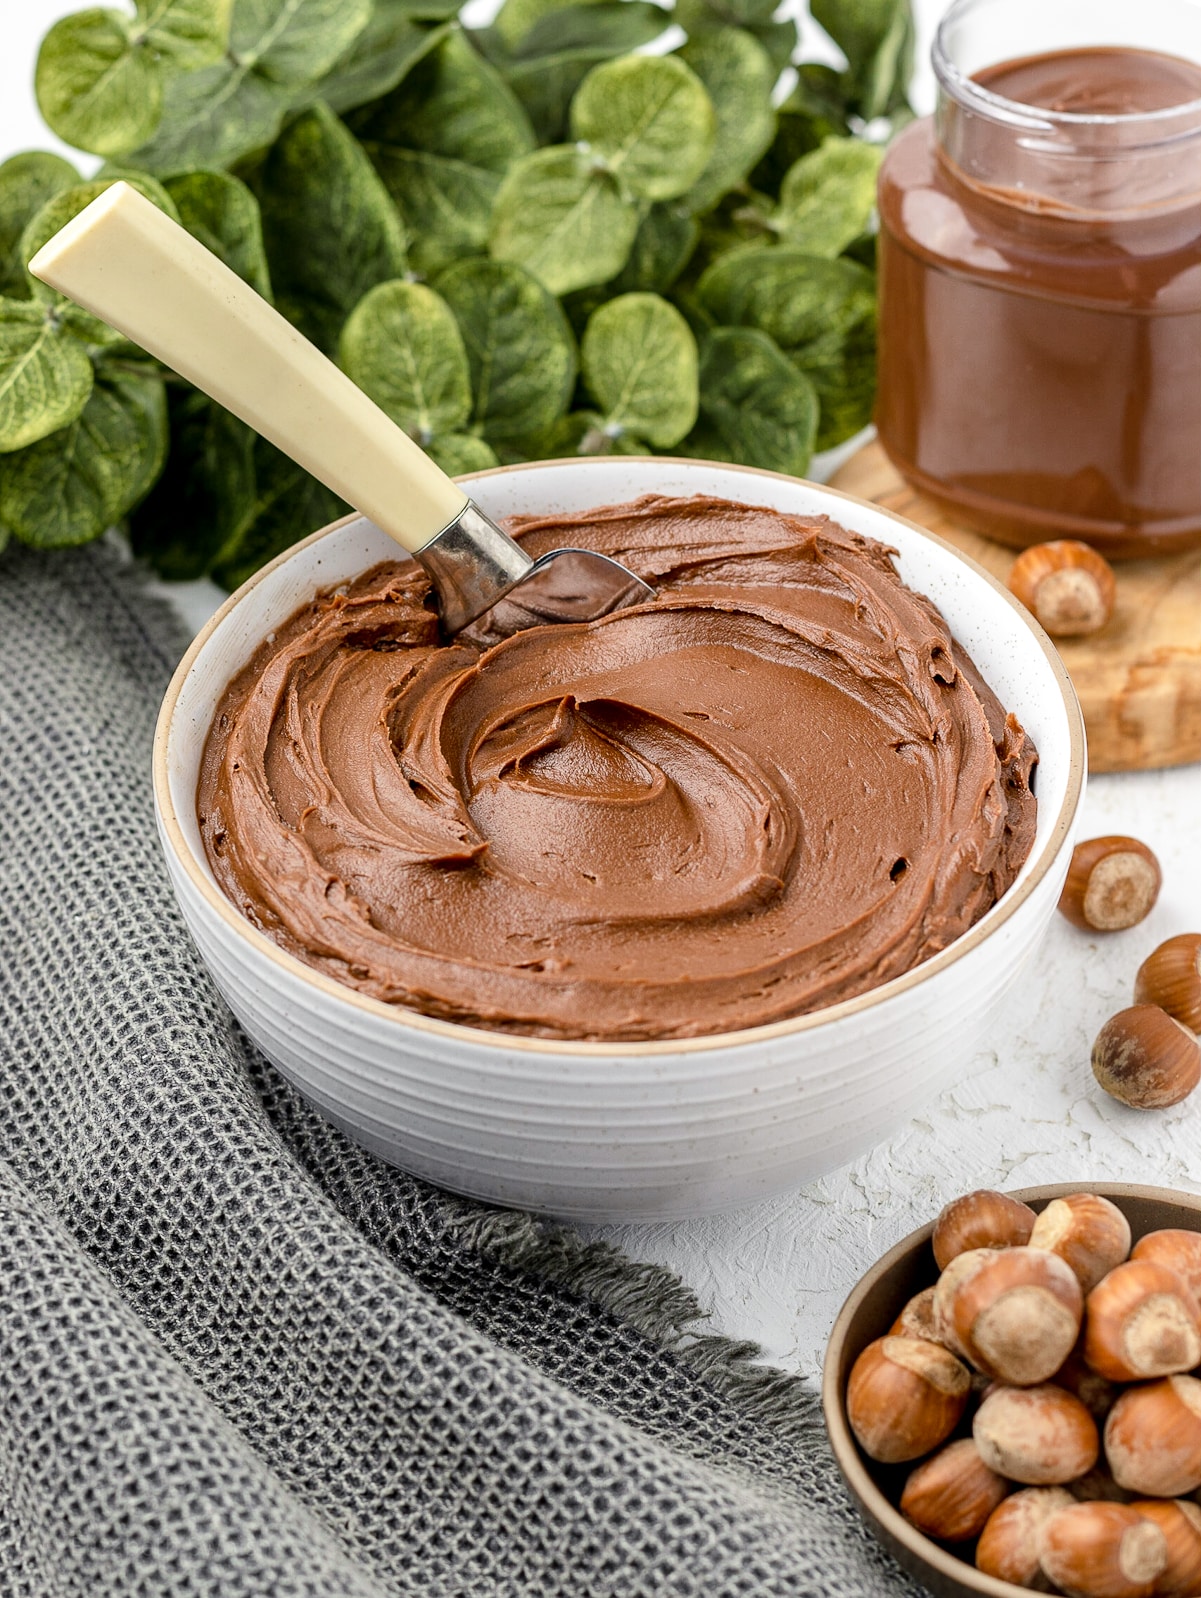 Nutella frosting in a bowl with a metal spreading tool. Whole hazelnuts and Nutella in the background.